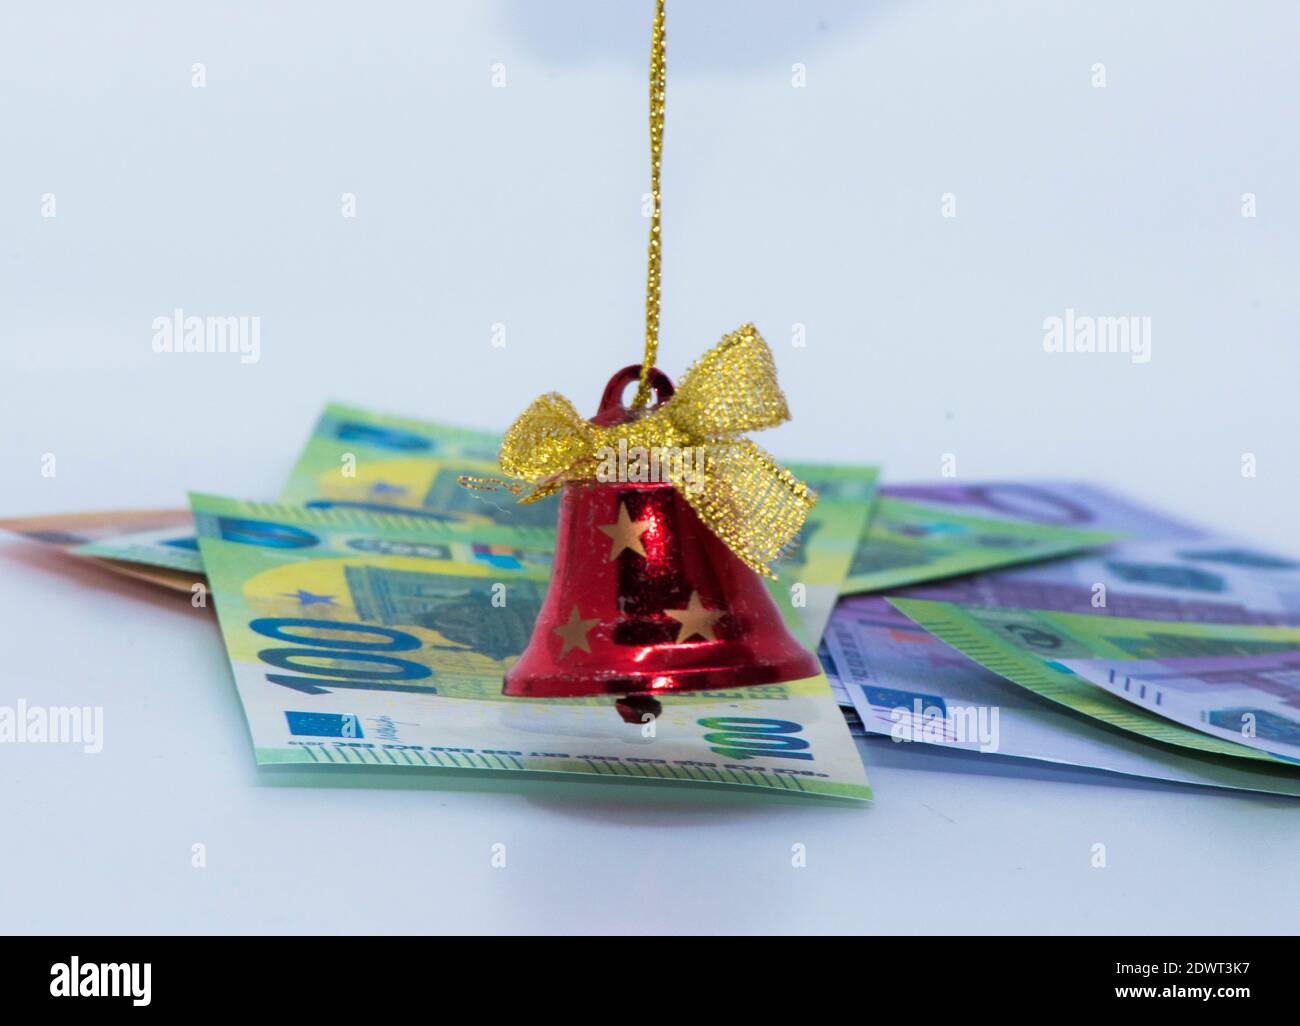 christmas business in the holiday season, purchasing gifts and spending money Stock Photo